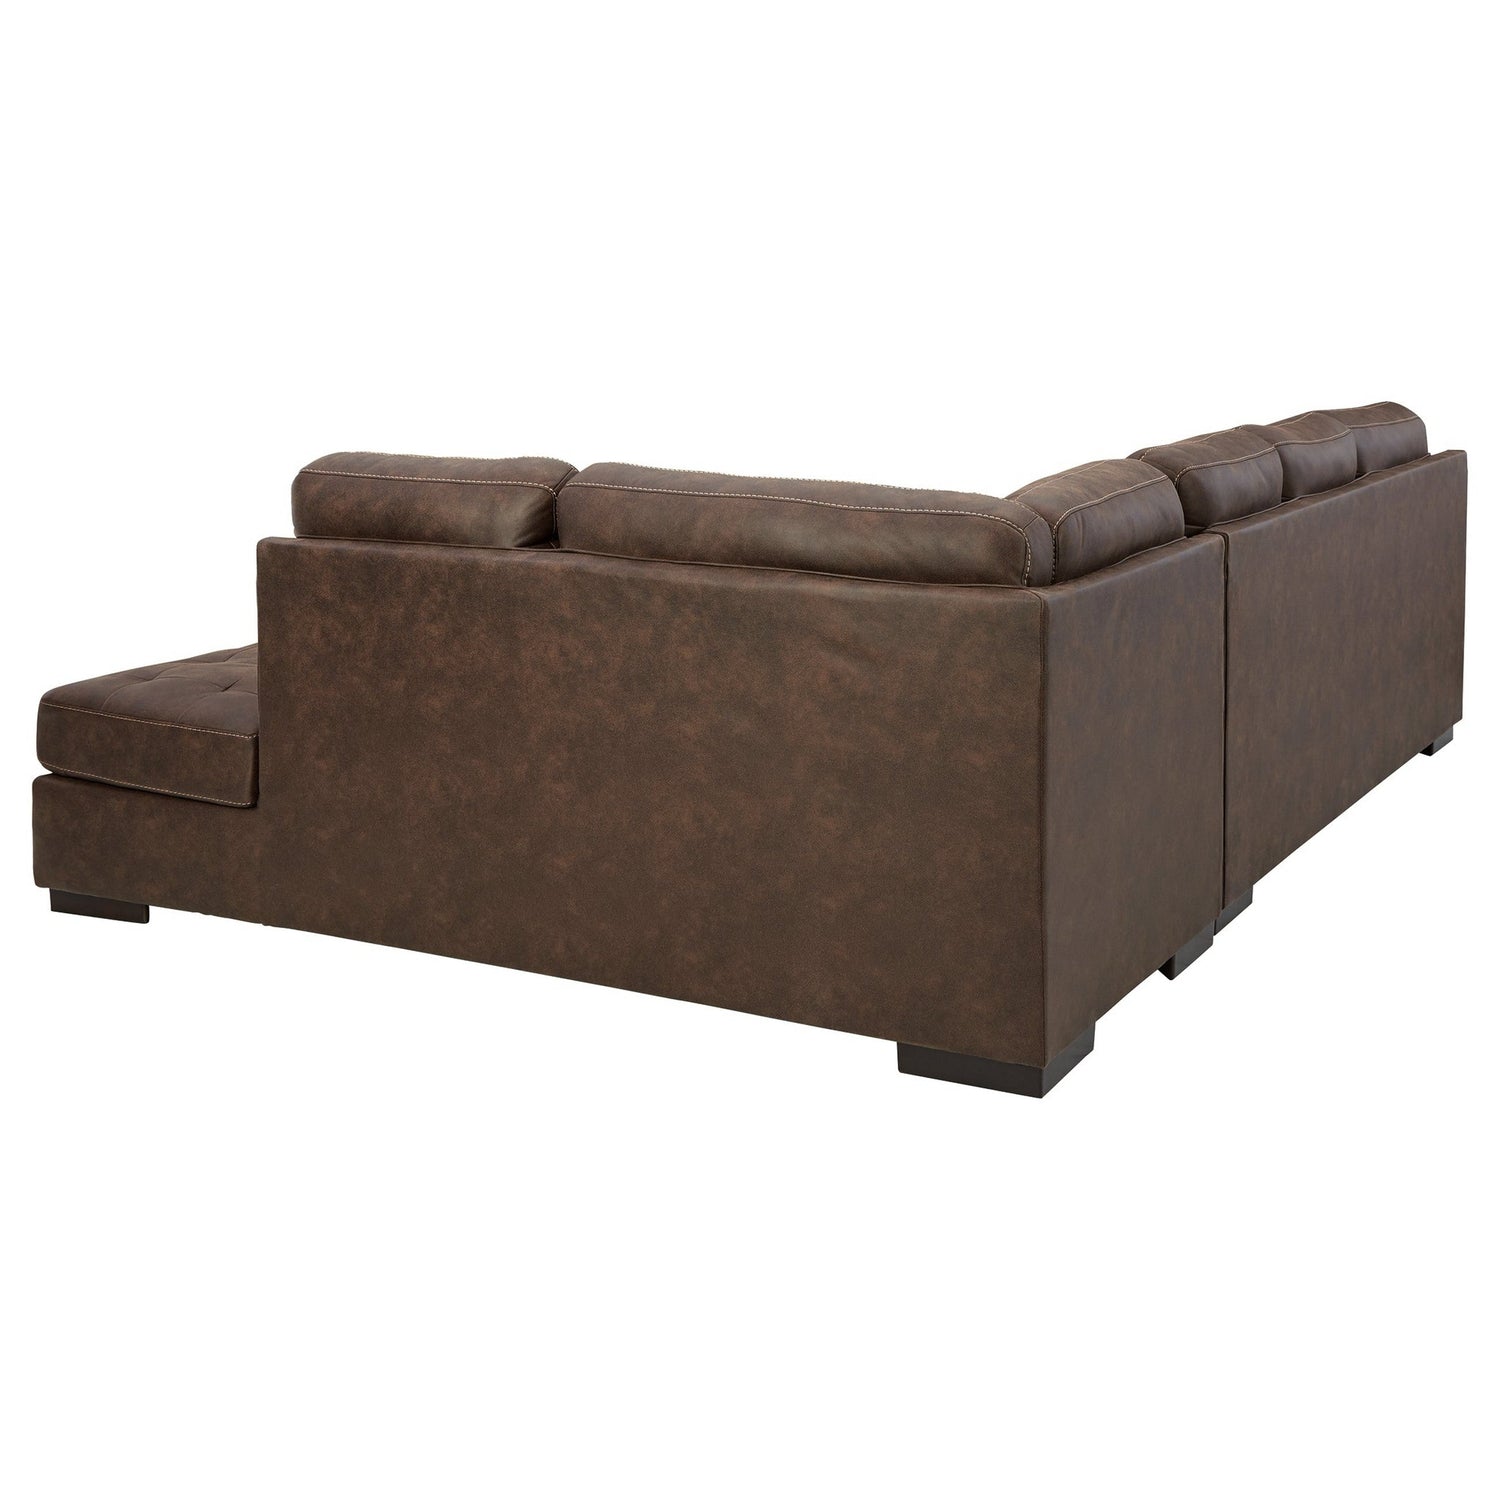 Maderla 2-Piece Sectional with Chaise Ash-62002S2